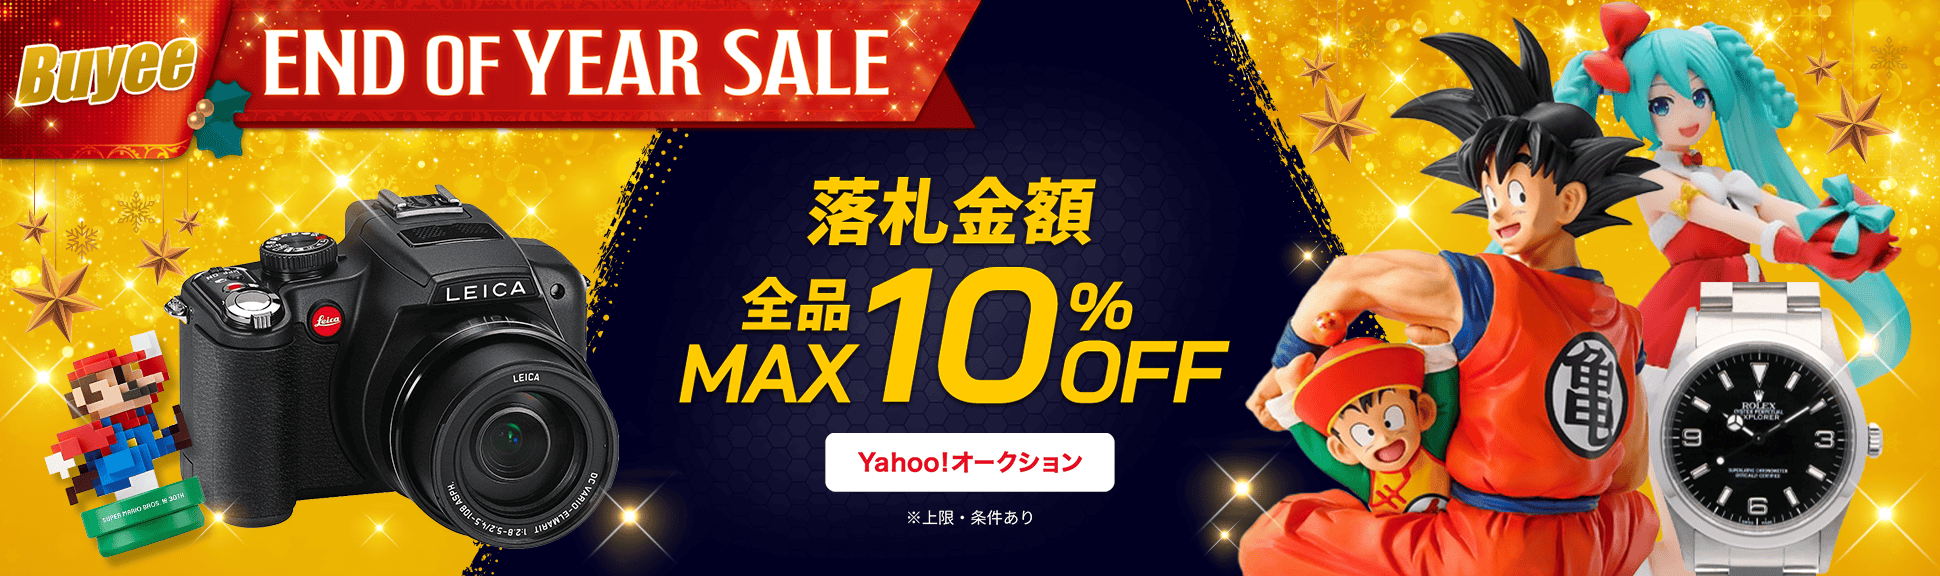 Buyee End of Year Sale!落札金額MAX 10％OFF タイムセールクーポン配布中！